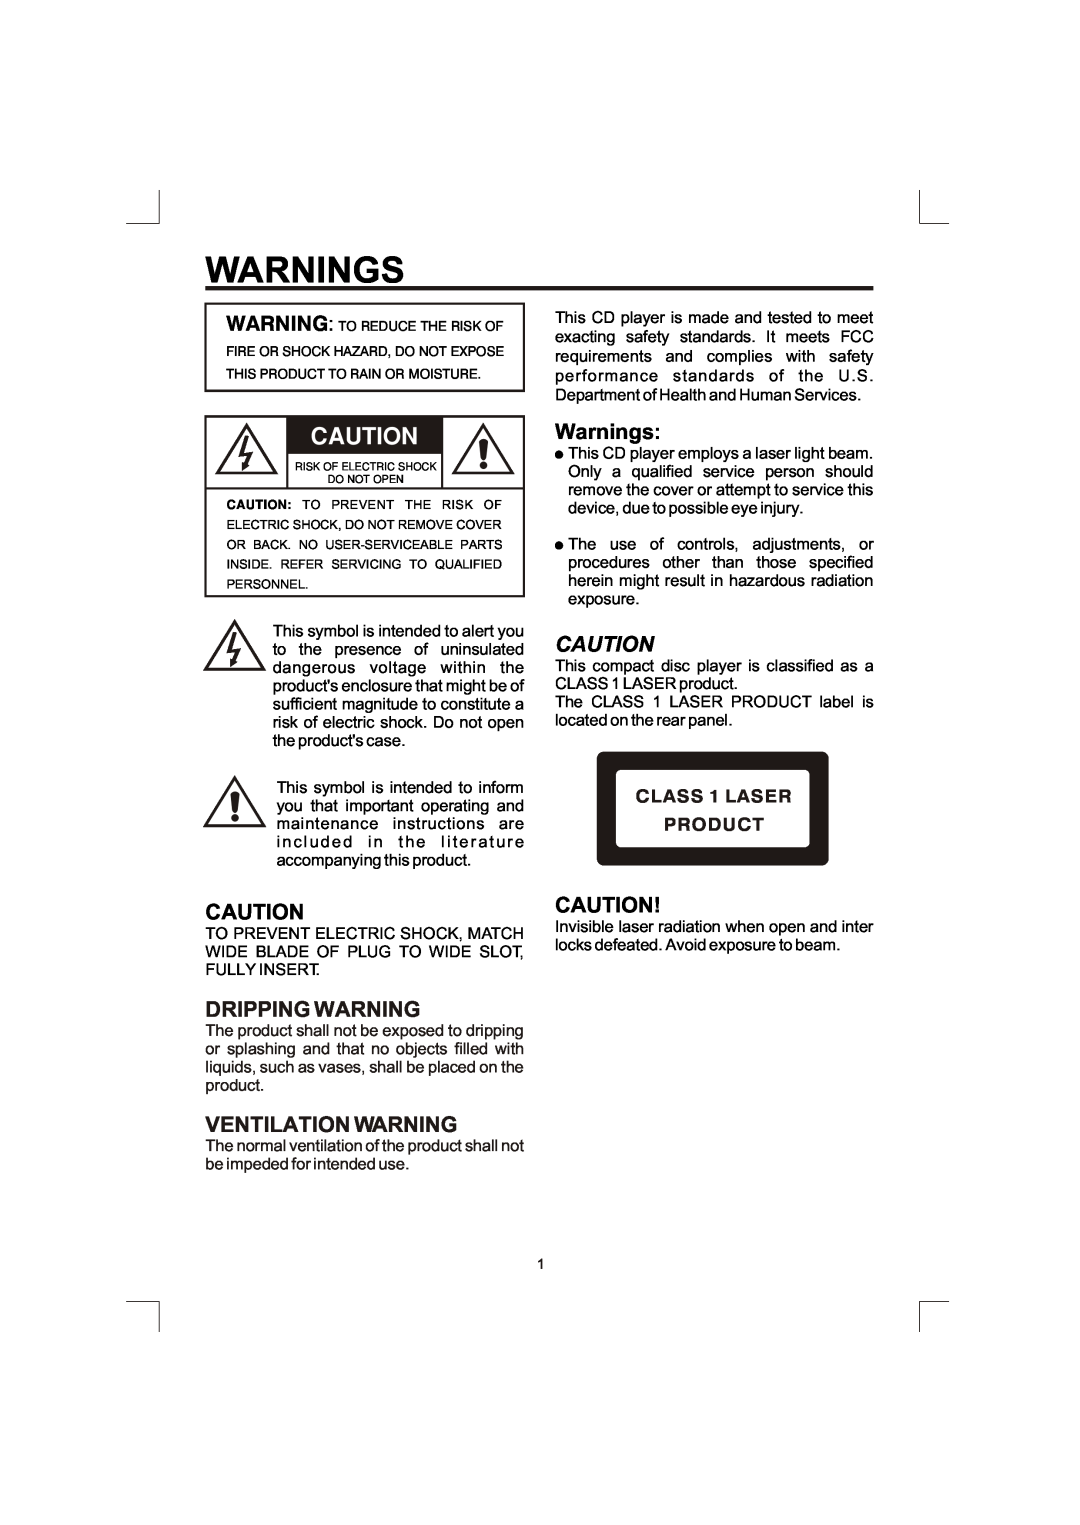 The Singing Machine SMG-138 owner manual Warnings, Dripping Warning, Ventilation Warning, CLASS 1 LASER PRODUCT 